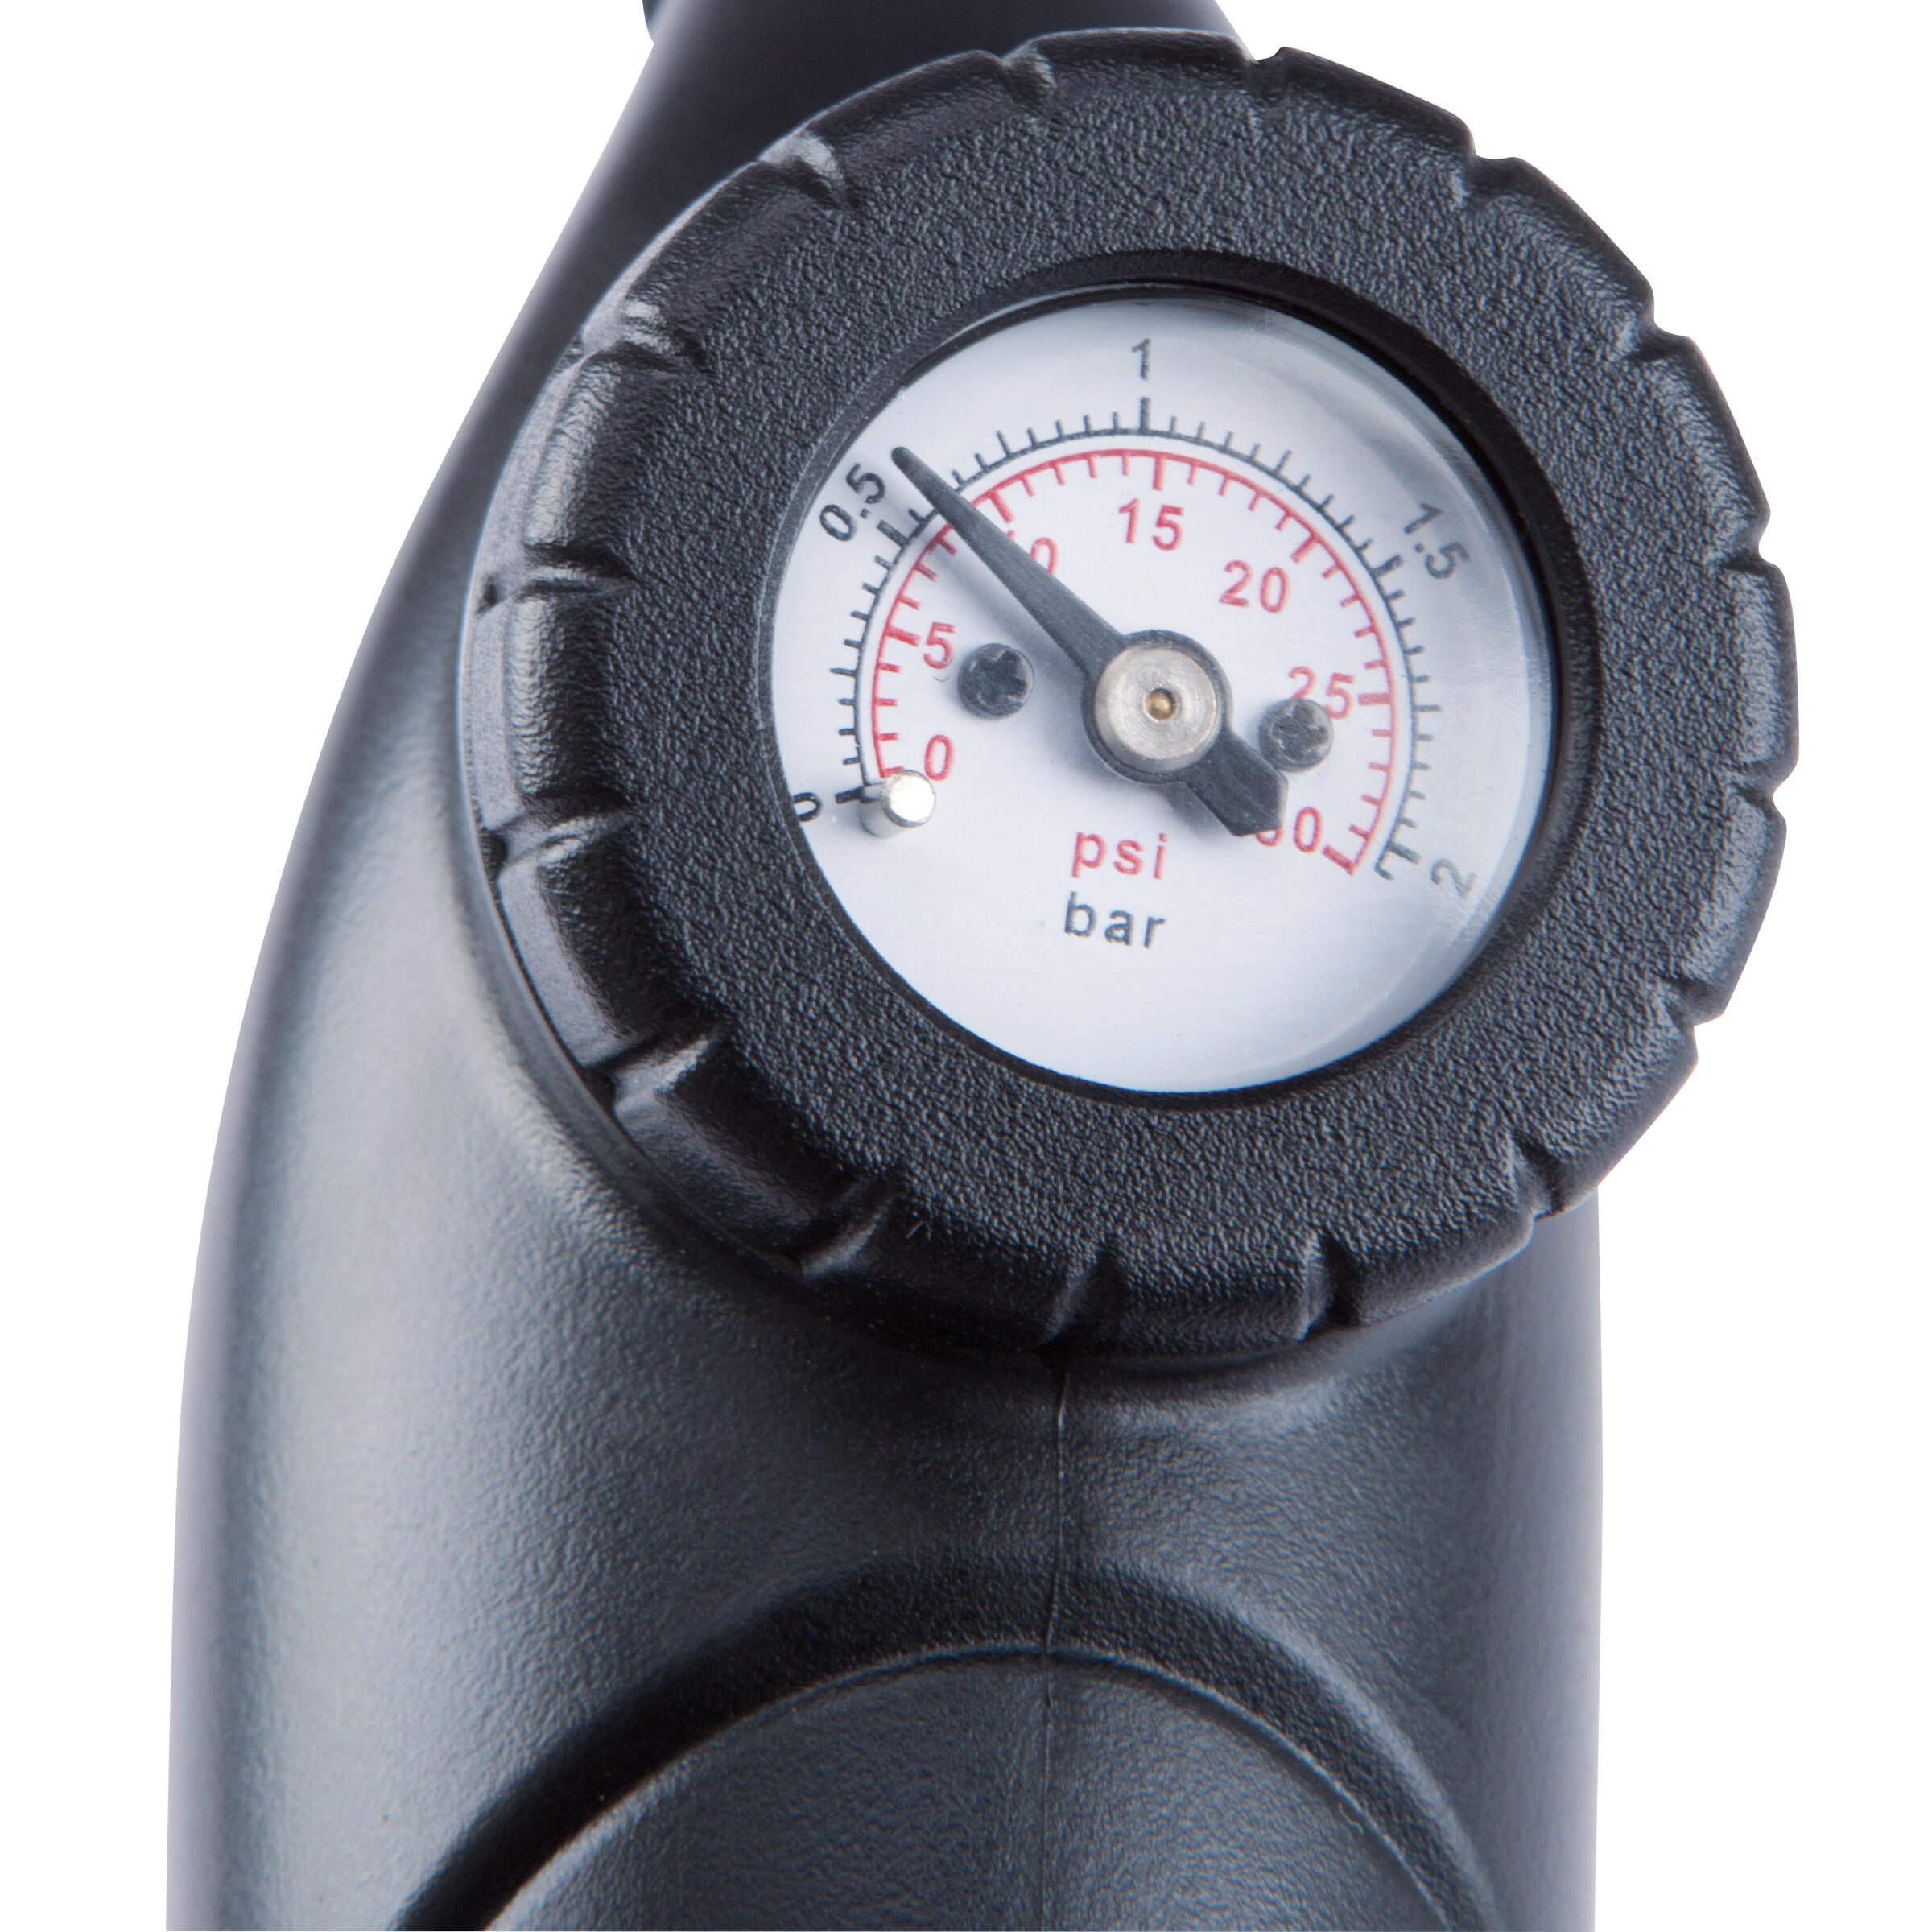 Dual Action Ball Pump & Pressure Gauge with Hose - KIPSTA